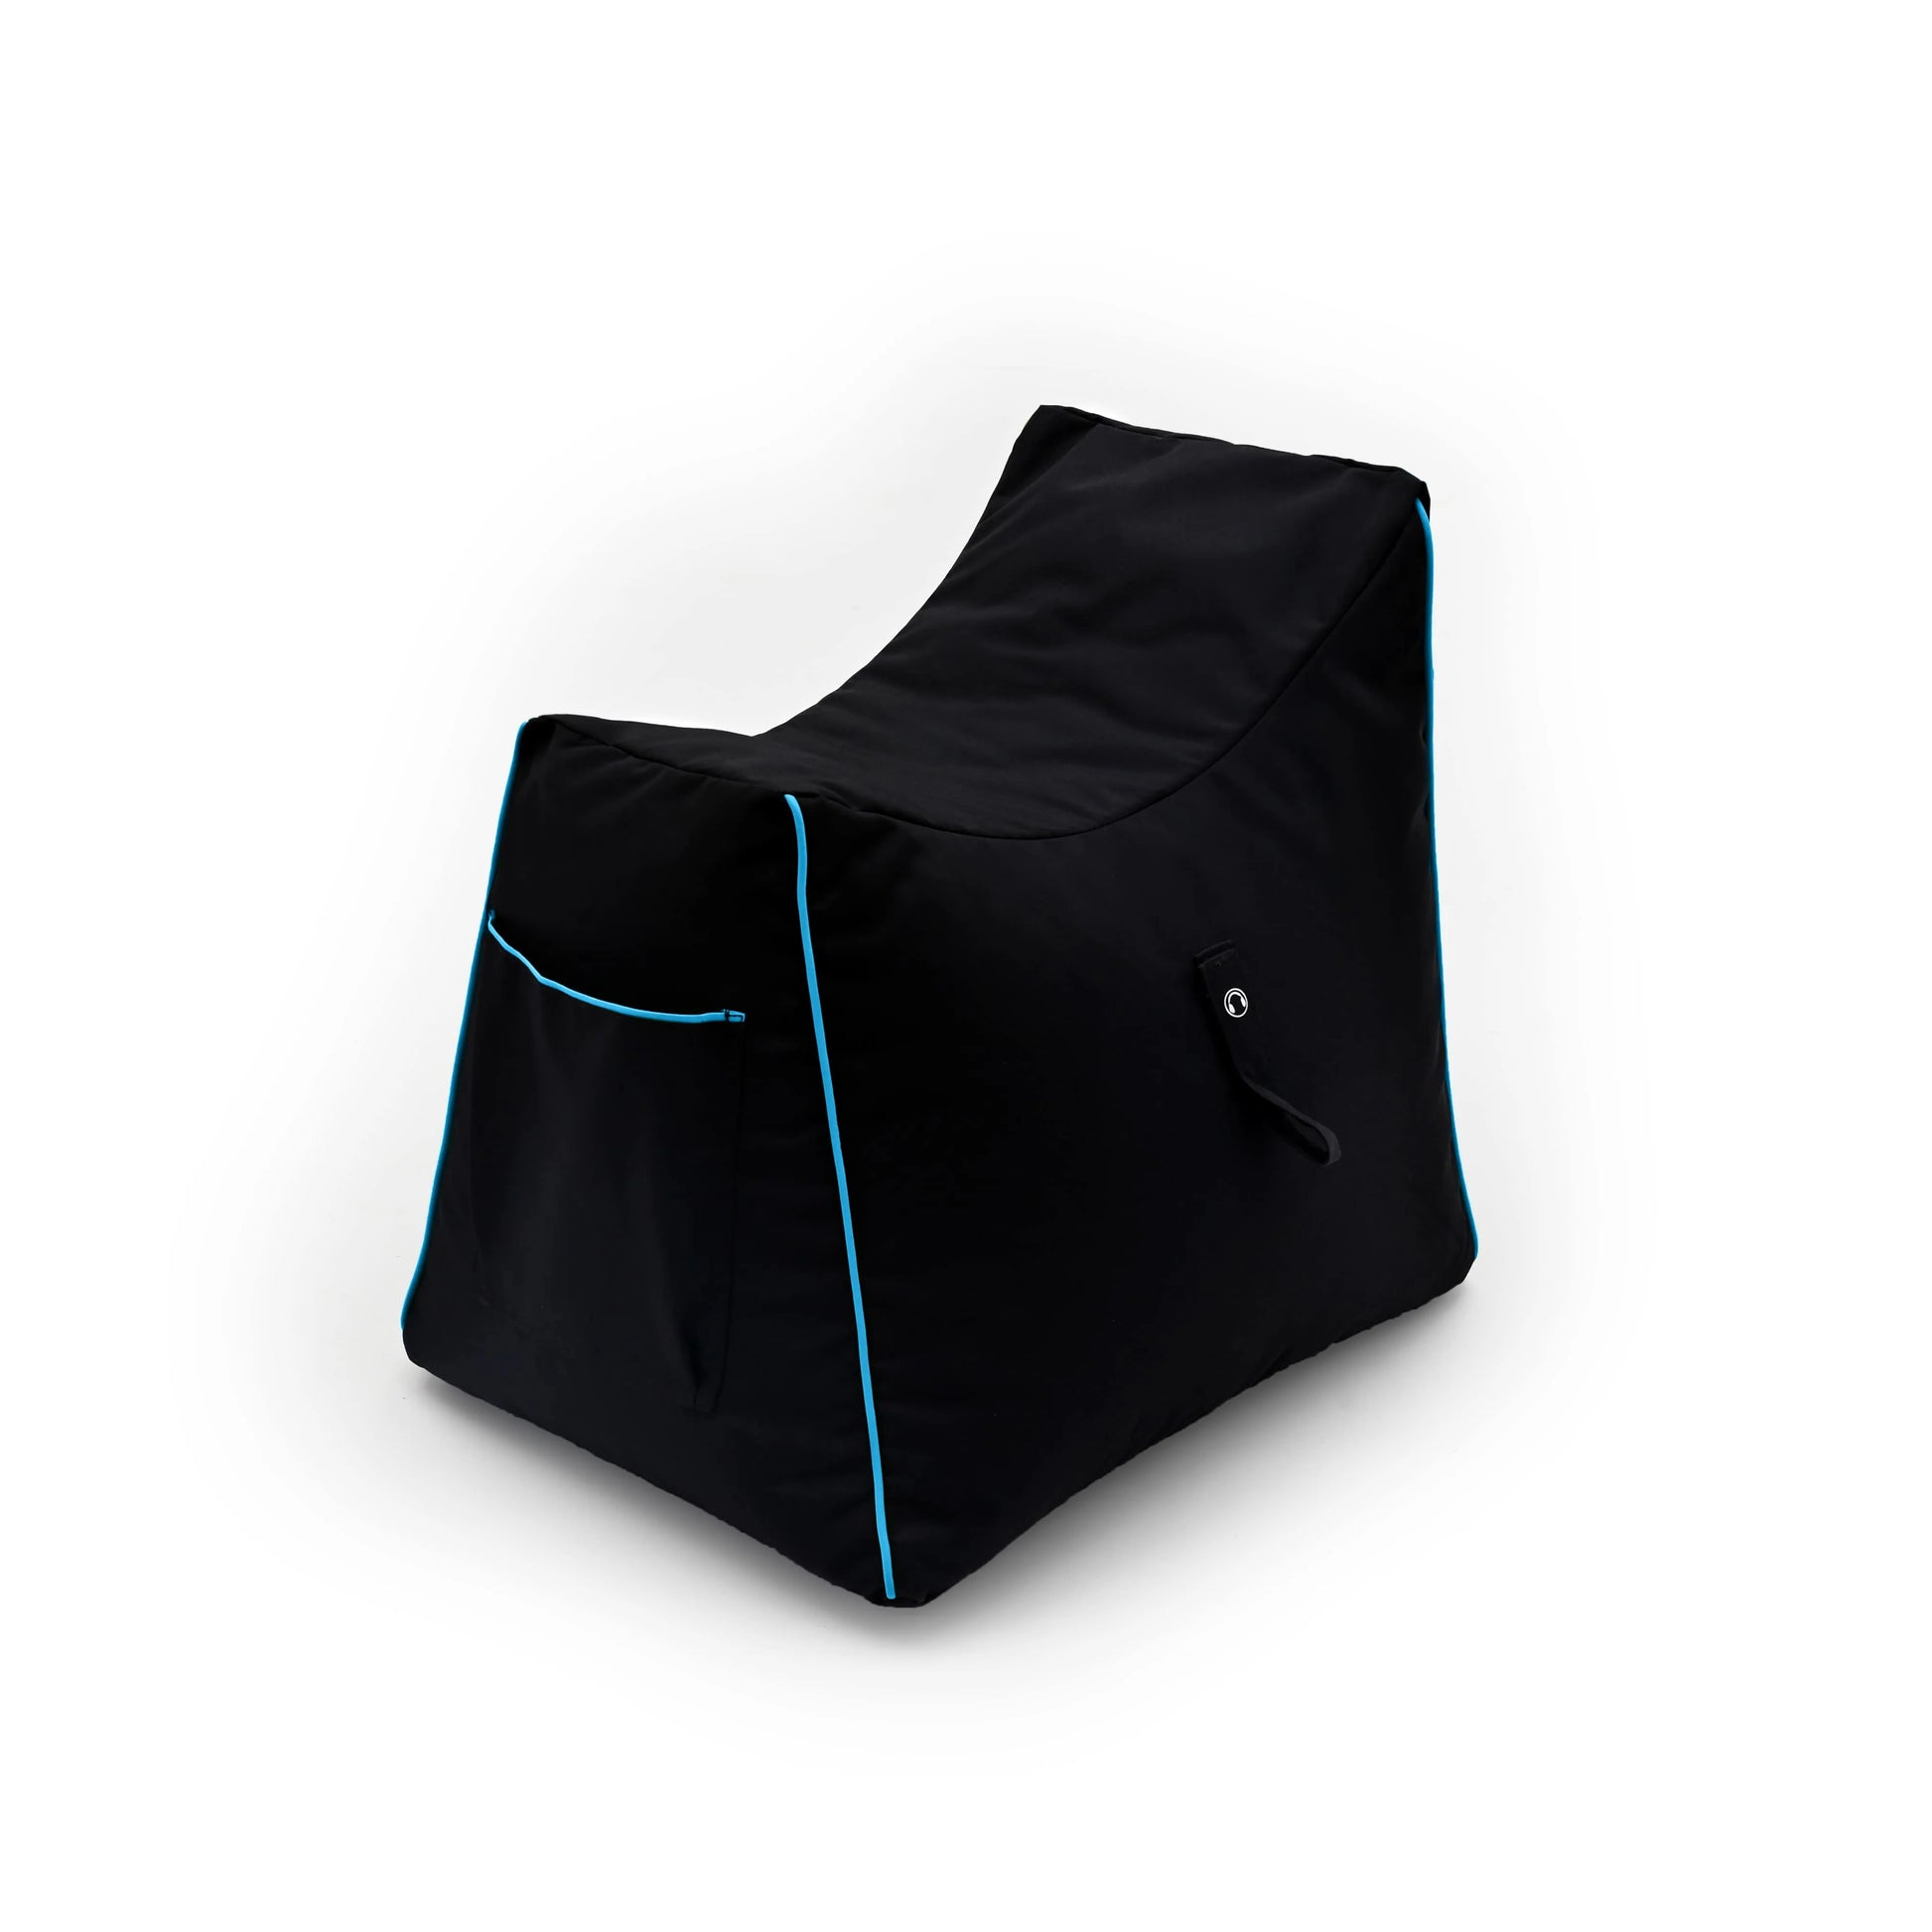 A black beanbag cover with a turq trim, perfect for relaxing or gaming.